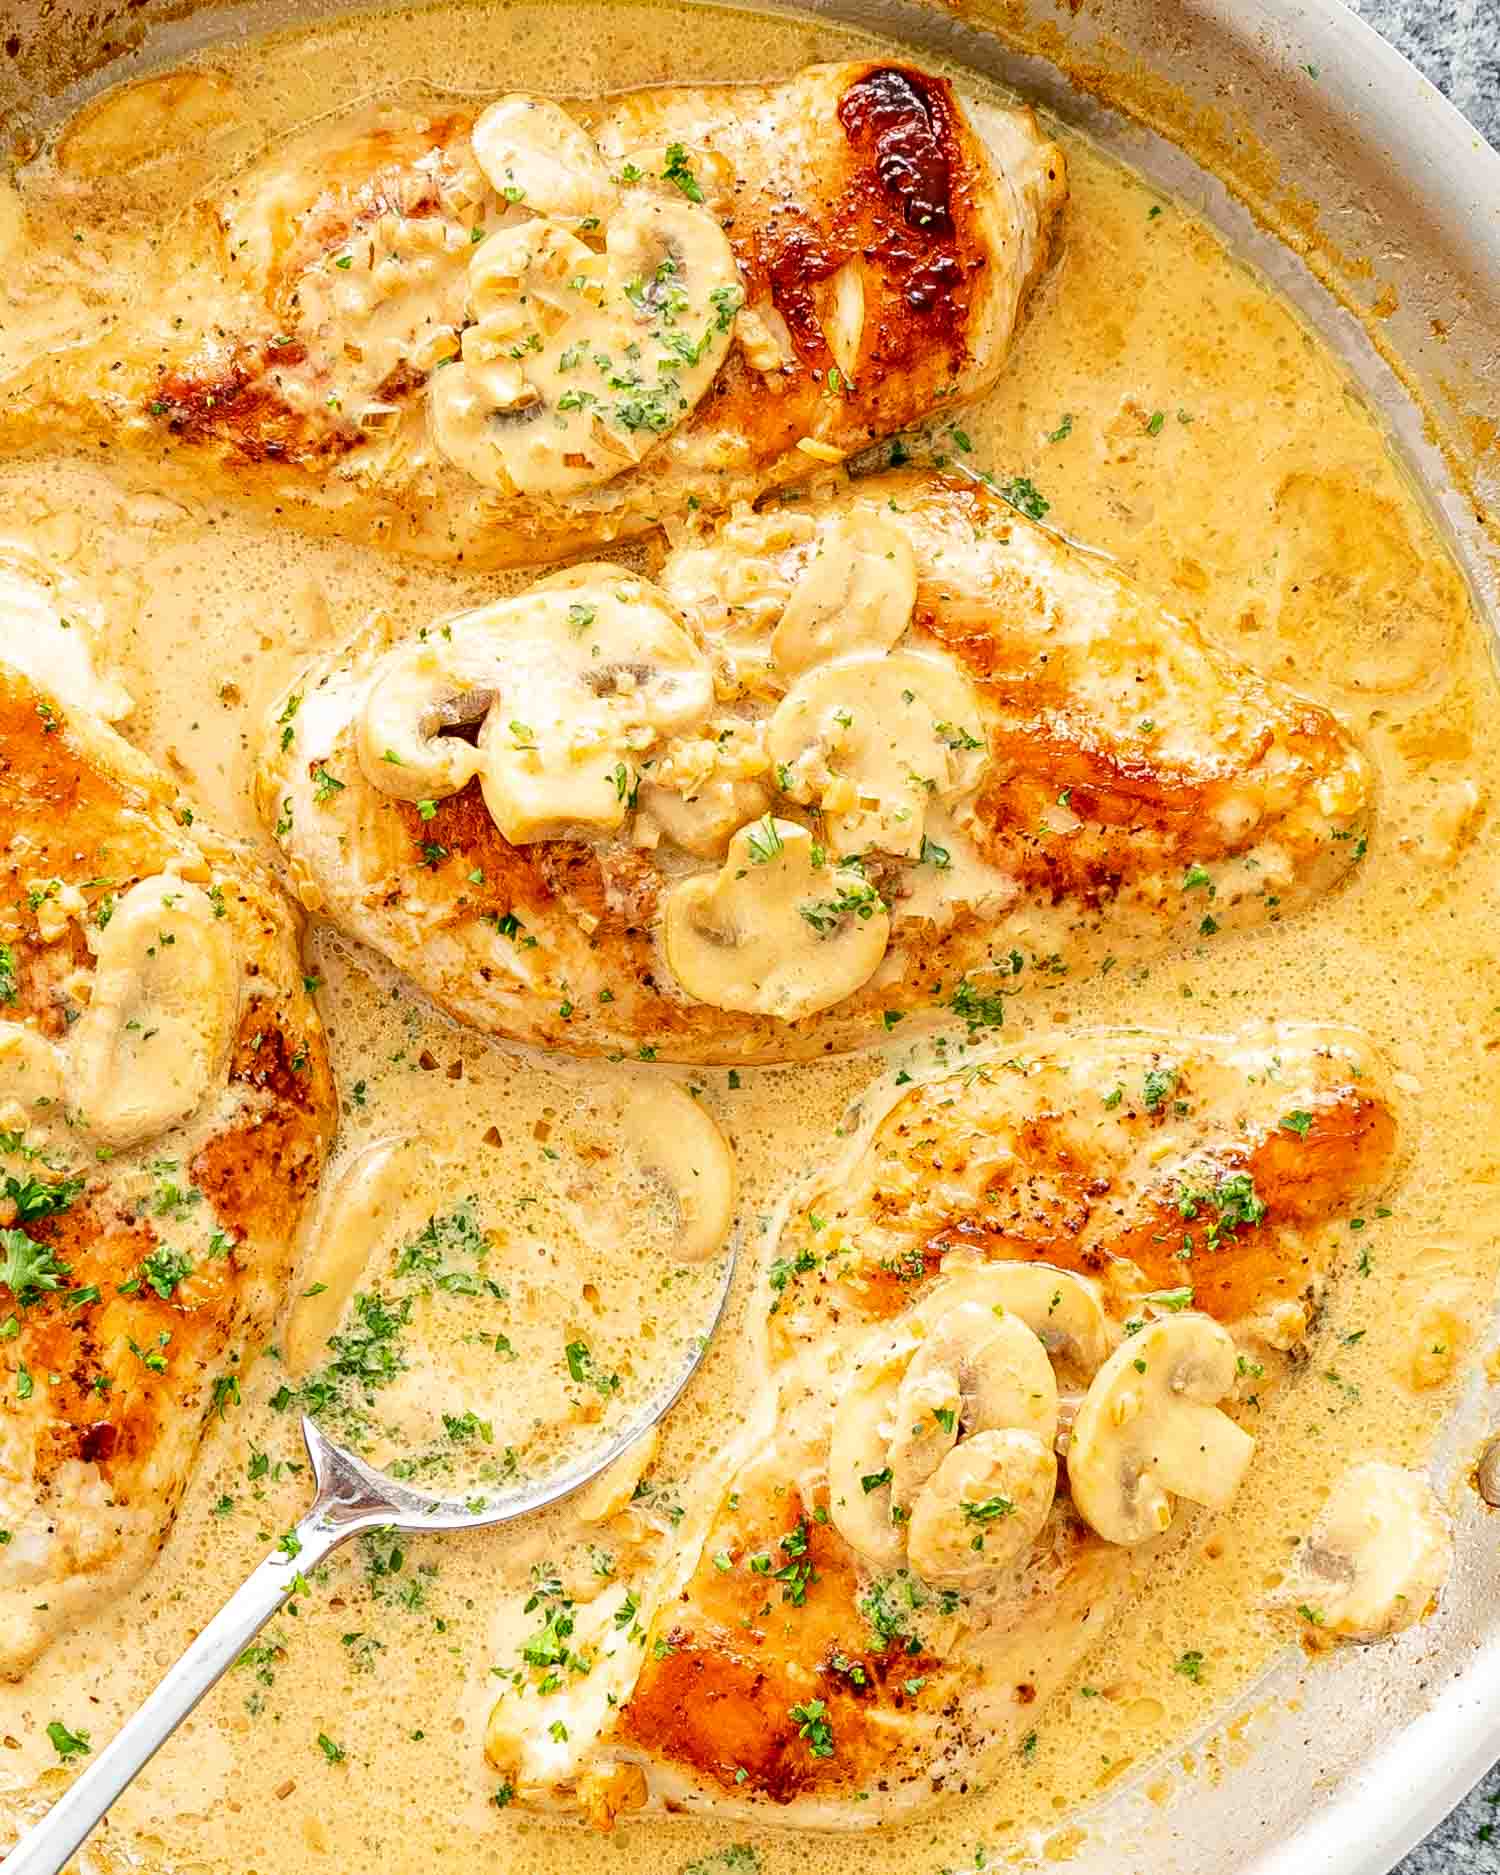 Golden Chicken Diane with mushrooms in a creamy sauce, sprinkled with parsley in a skillet.